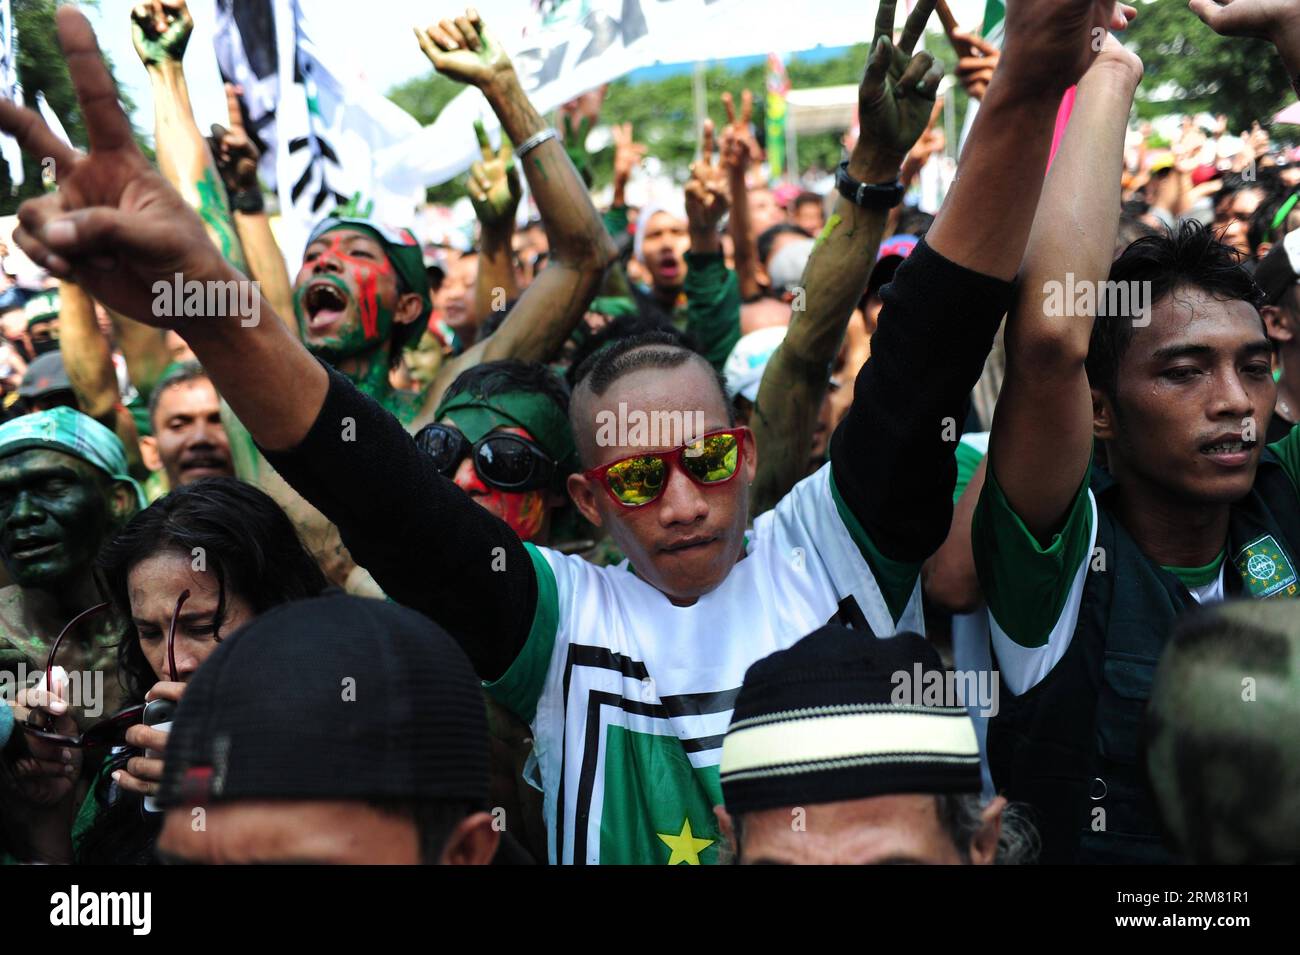 (140324) -- JAKARTA, March 24, 2014 (Xinhua) -- Supporters of Nation Awakening Party (PKB) take part in a campaign rally in Jakarta, Indonesia, March 24, 2014. Indonesia is to hold direct legislative elections on April 9 and direct presidential polls on July 9. (Xinhua/Zulkarnain) INDONESIA-JAKARTA-ELECTION CAMPAIGN PUBLICATIONxNOTxINxCHN   Jakarta March 24 2014 XINHUA Supporters of Nation Awakening Party PKB Take Part in a Campaign Rally in Jakarta Indonesia March 24 2014 Indonesia IS to Hold Direct Legislature Elections ON April 9 and Direct Presidential Polls ON July 9 XINHUA  Indonesia Jak Stock Photo